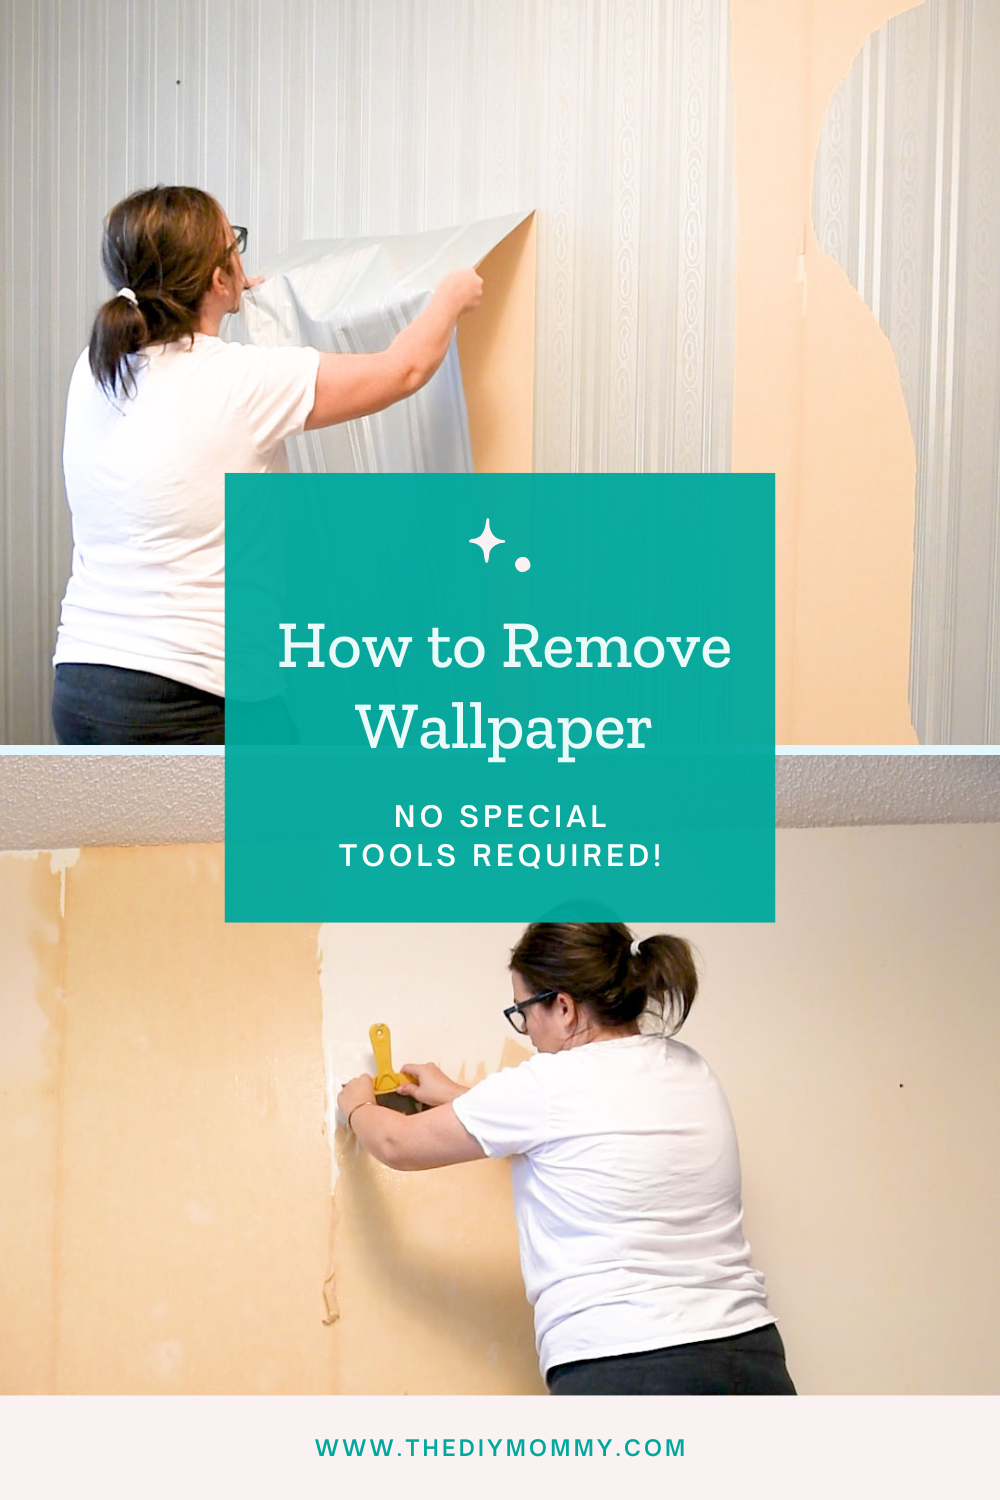 How to Remove Wallpaper (No Special Tools Required)